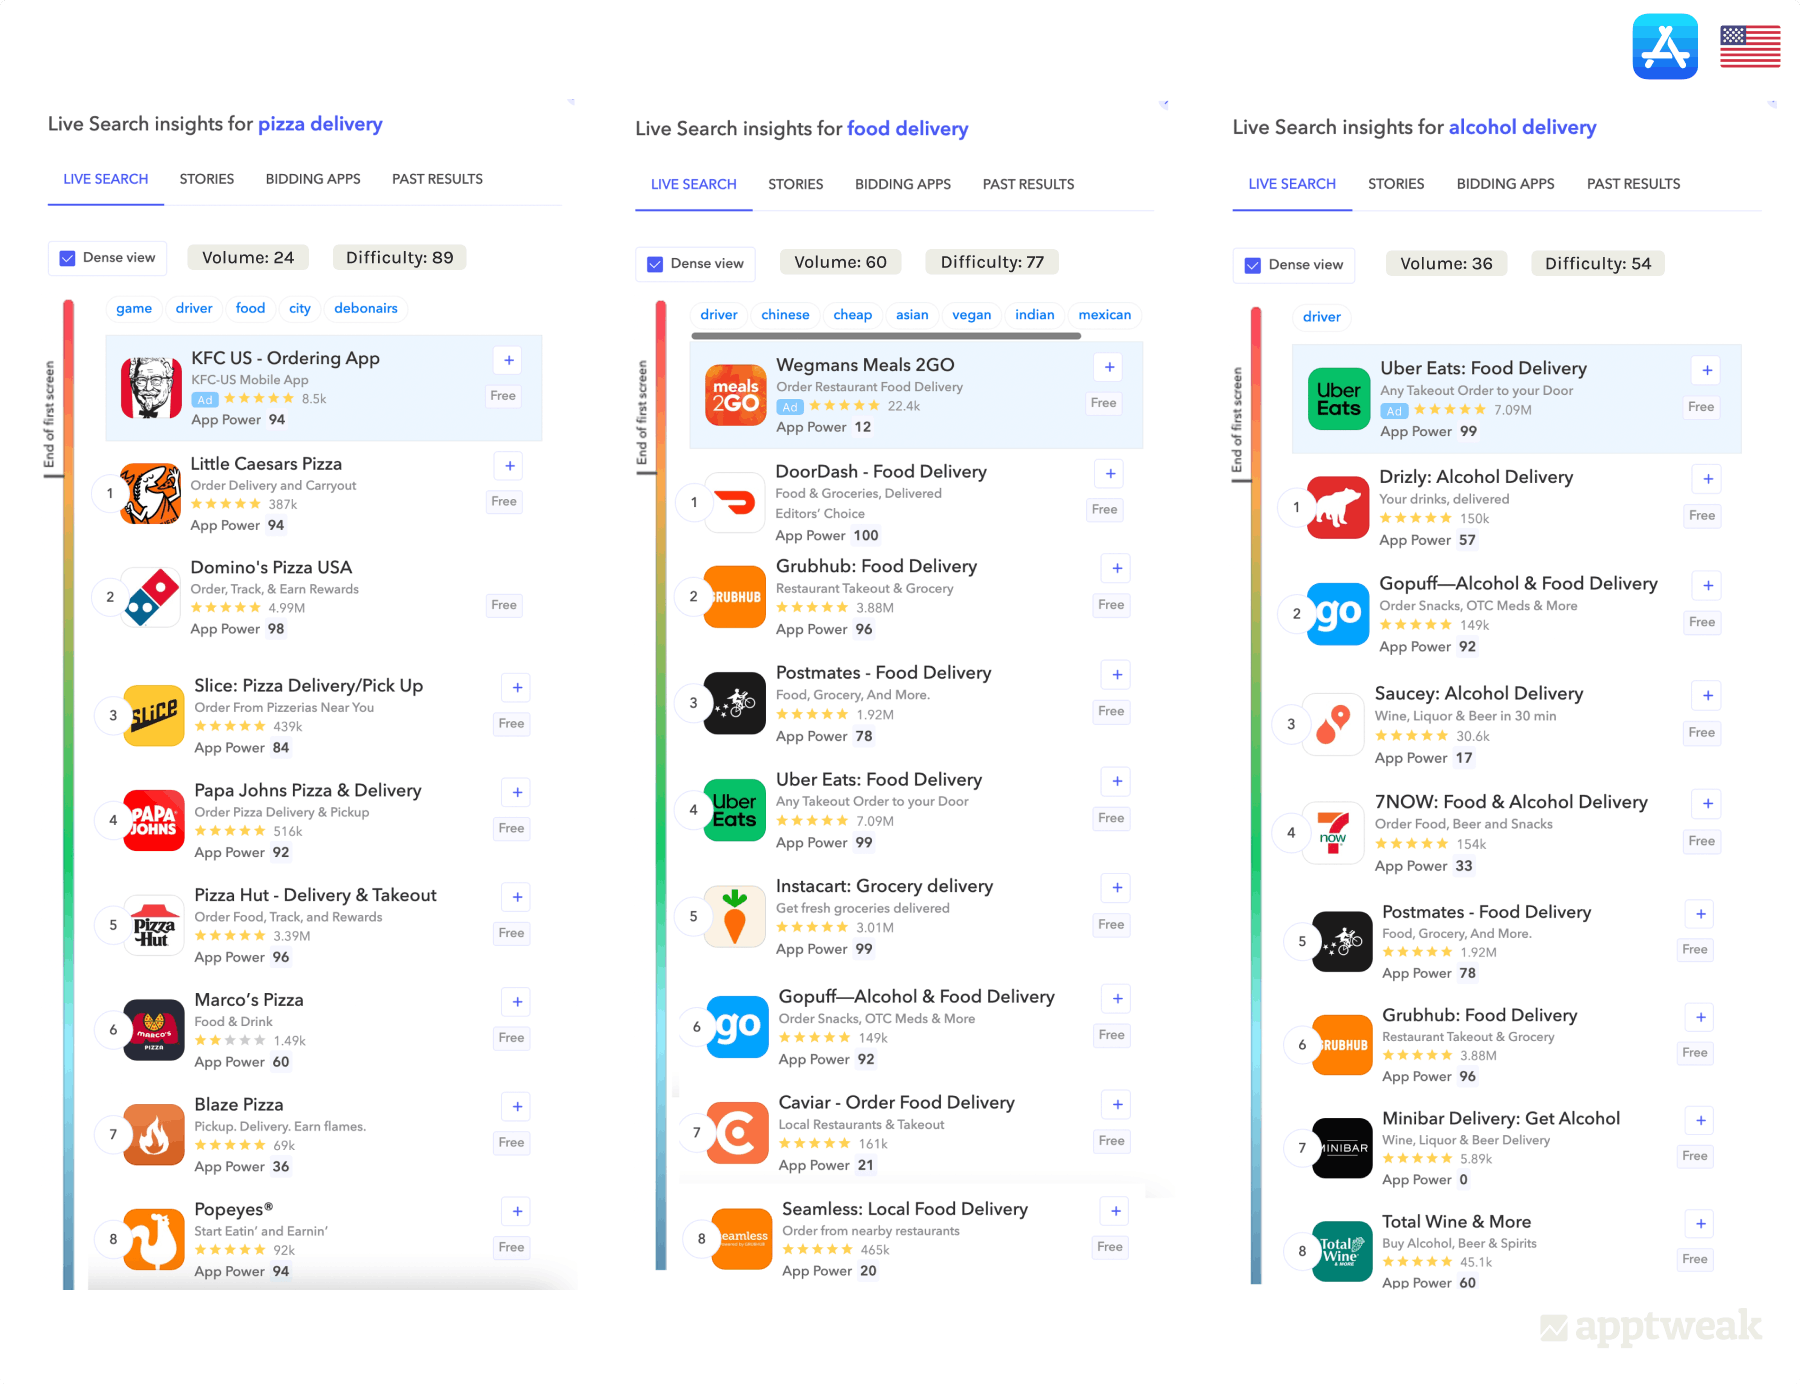 Comparing Live Search of the keywords “pizza delivery”, "food delivery" and “alcohol delivery” - iOS US